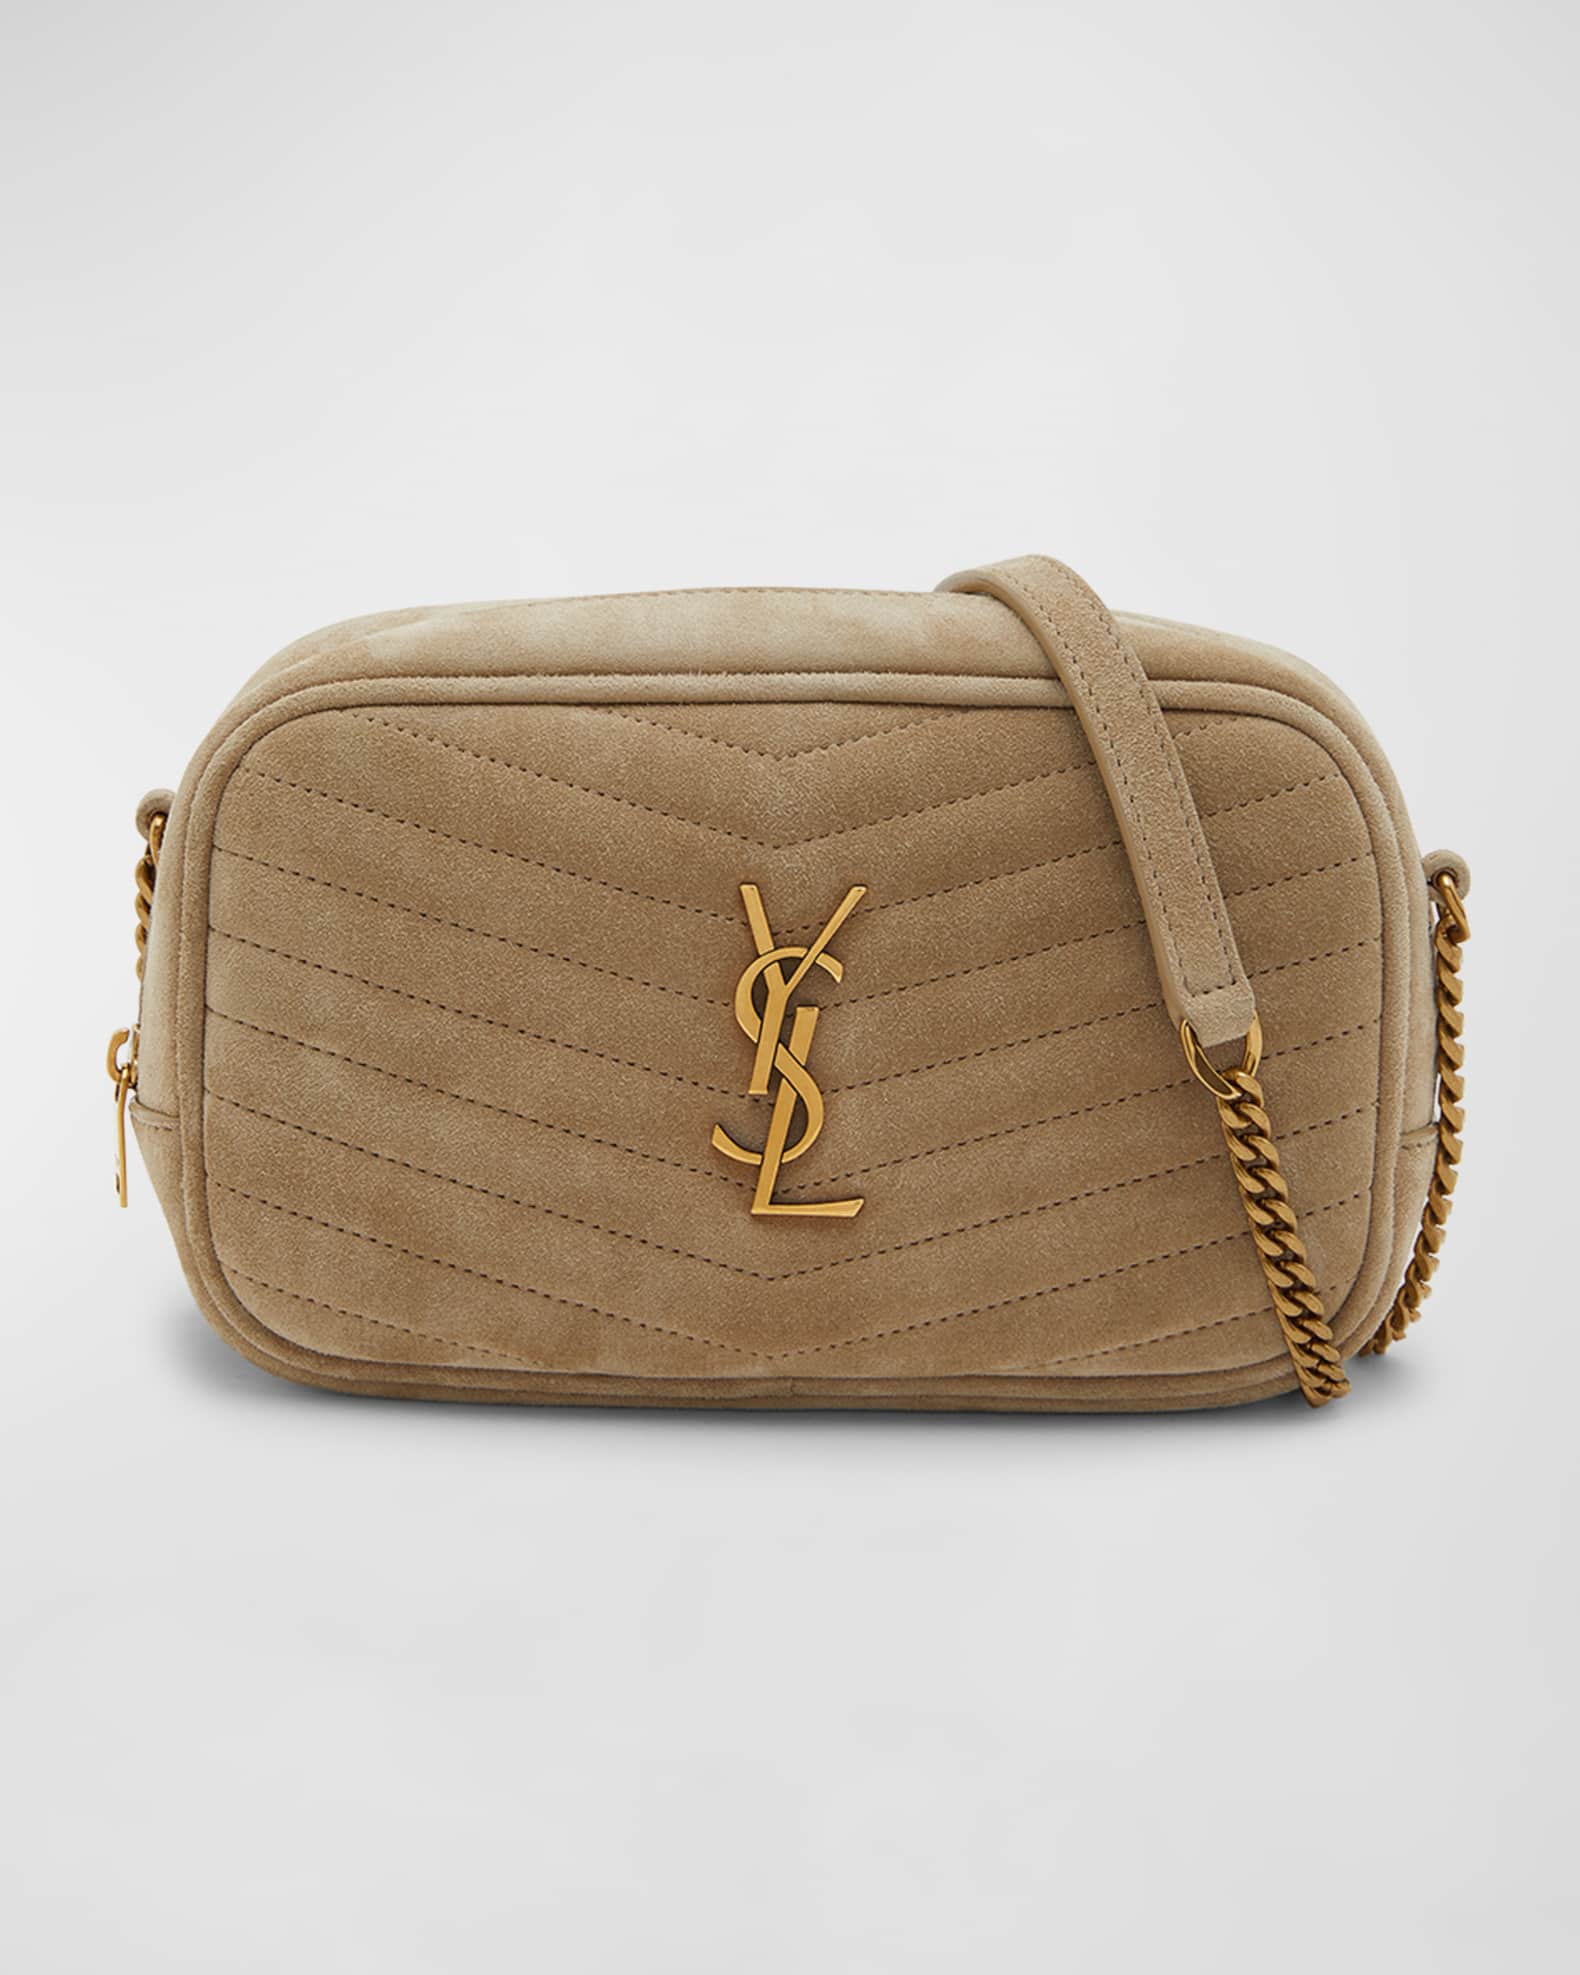 Lou Mini YSL Camera Bag in Quilted Suede | Neiman Marcus